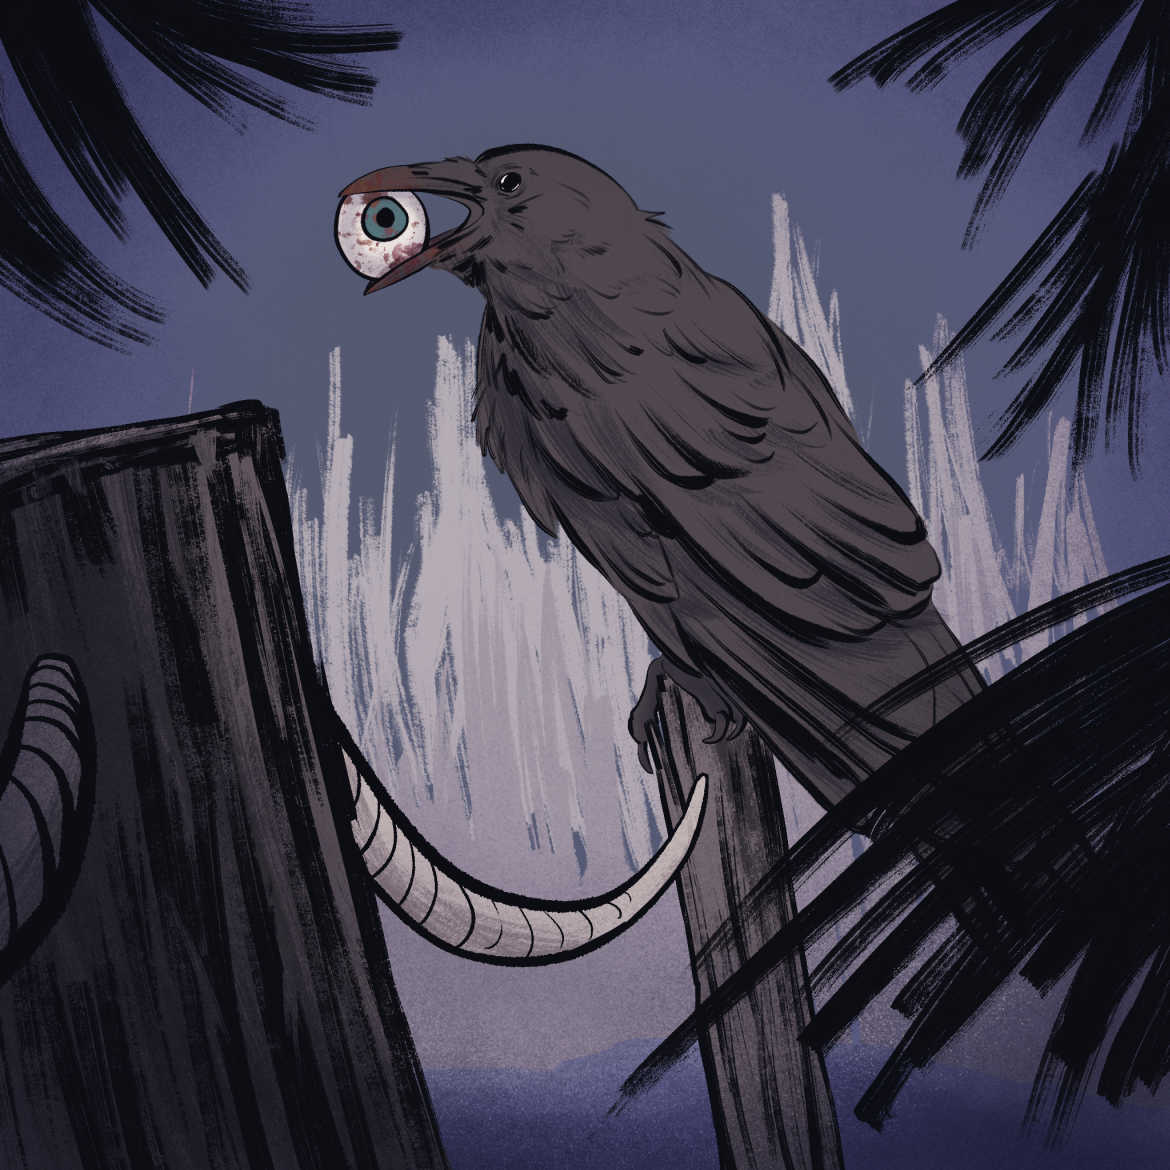 A crow sits on a pole jutting out of a river, with a bloody eyeball in its beak.